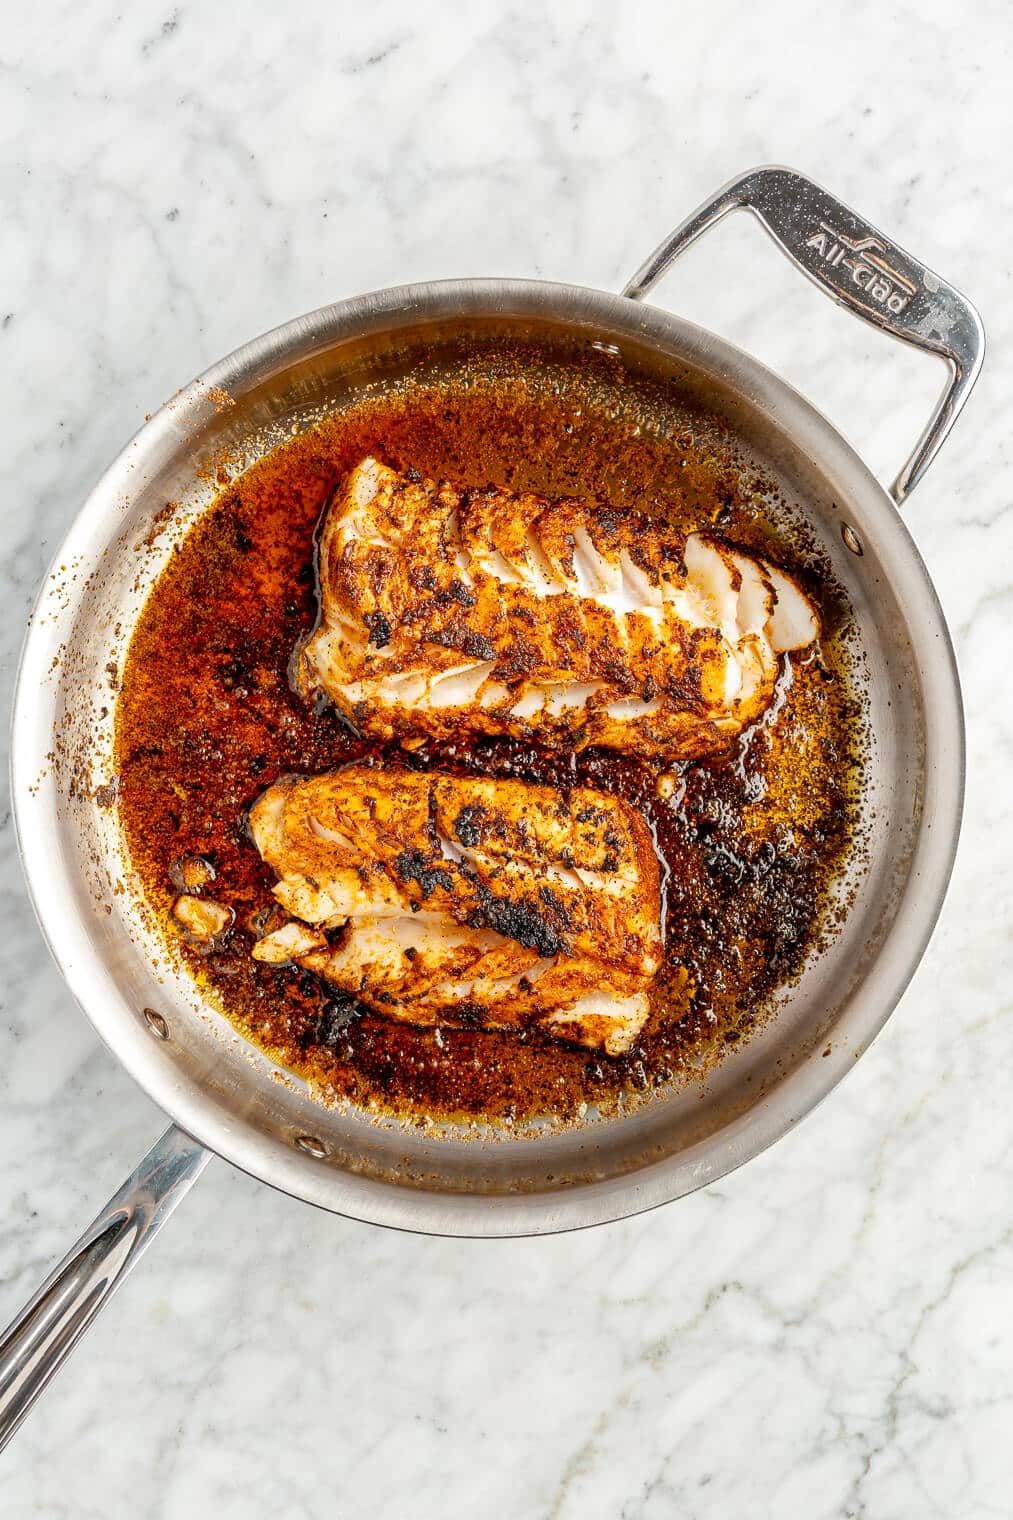 Cod filets coated in blackened seasoning in a large skillet with butter that has been cooked and seared on one side.